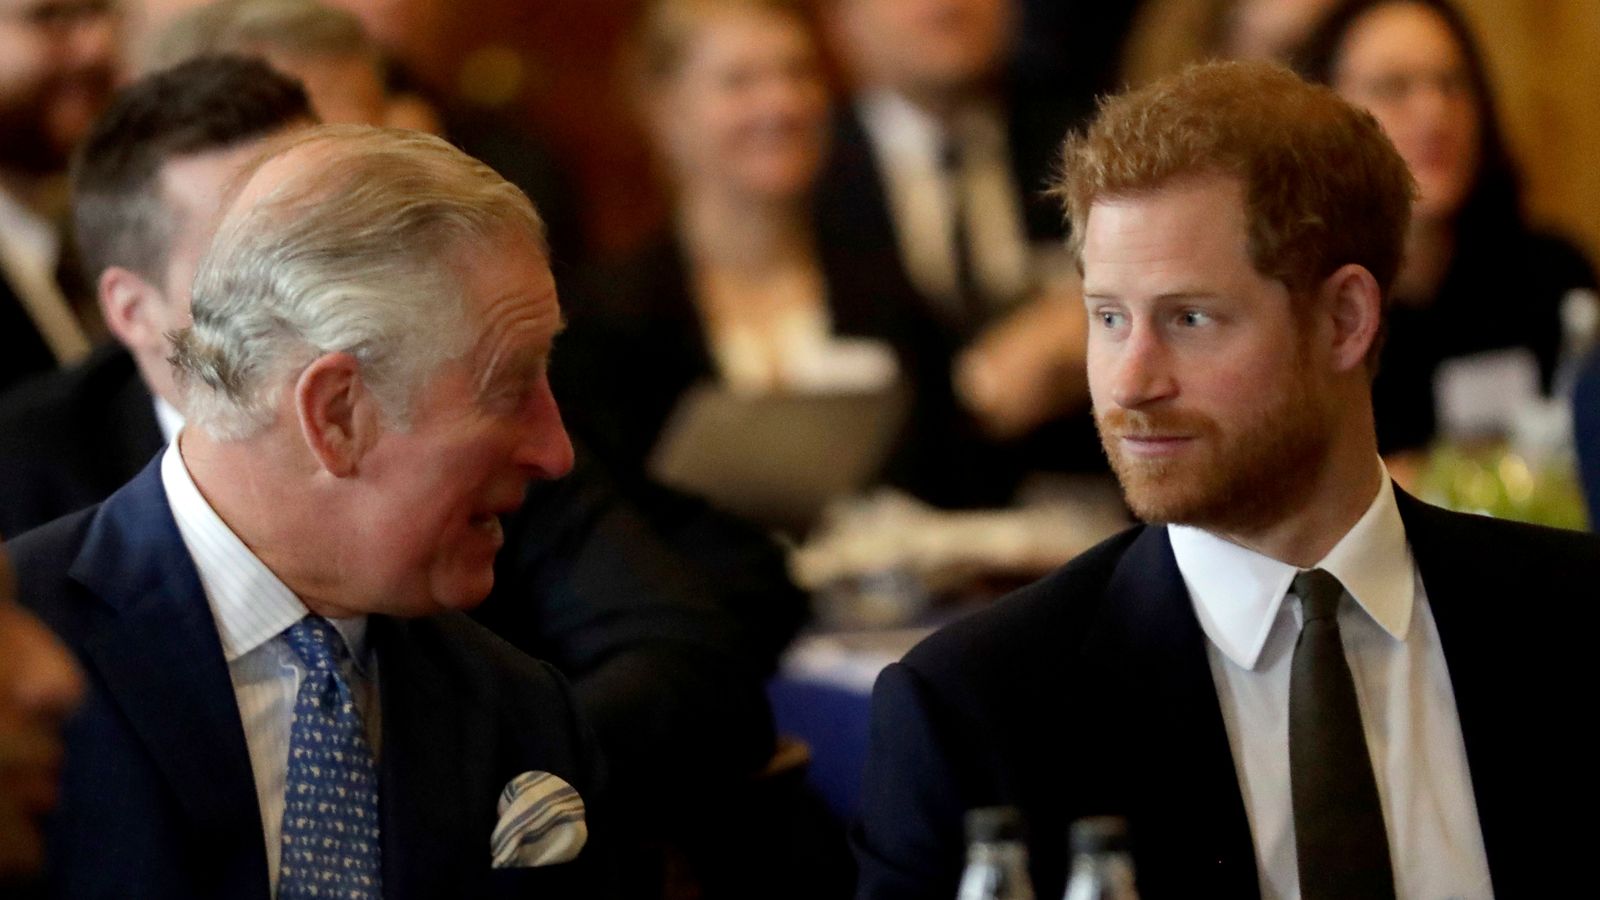 King Charles cancer diagnosis: Prince Harry to travel to UK to see monarch 'in coming days''